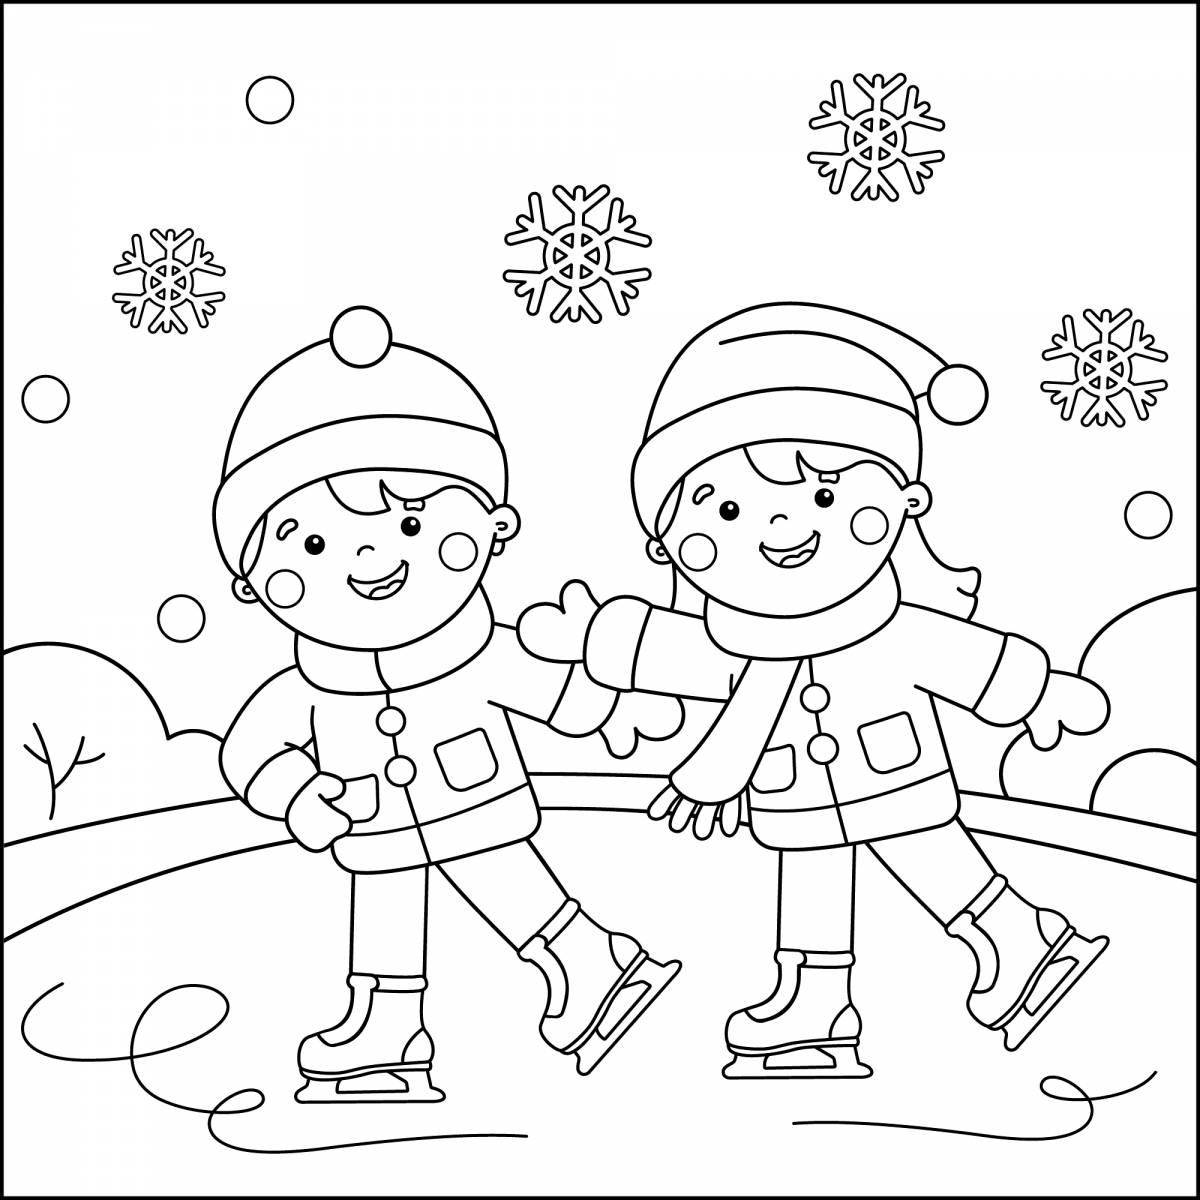 Fun coloring book winter sports for children 6-7 years old